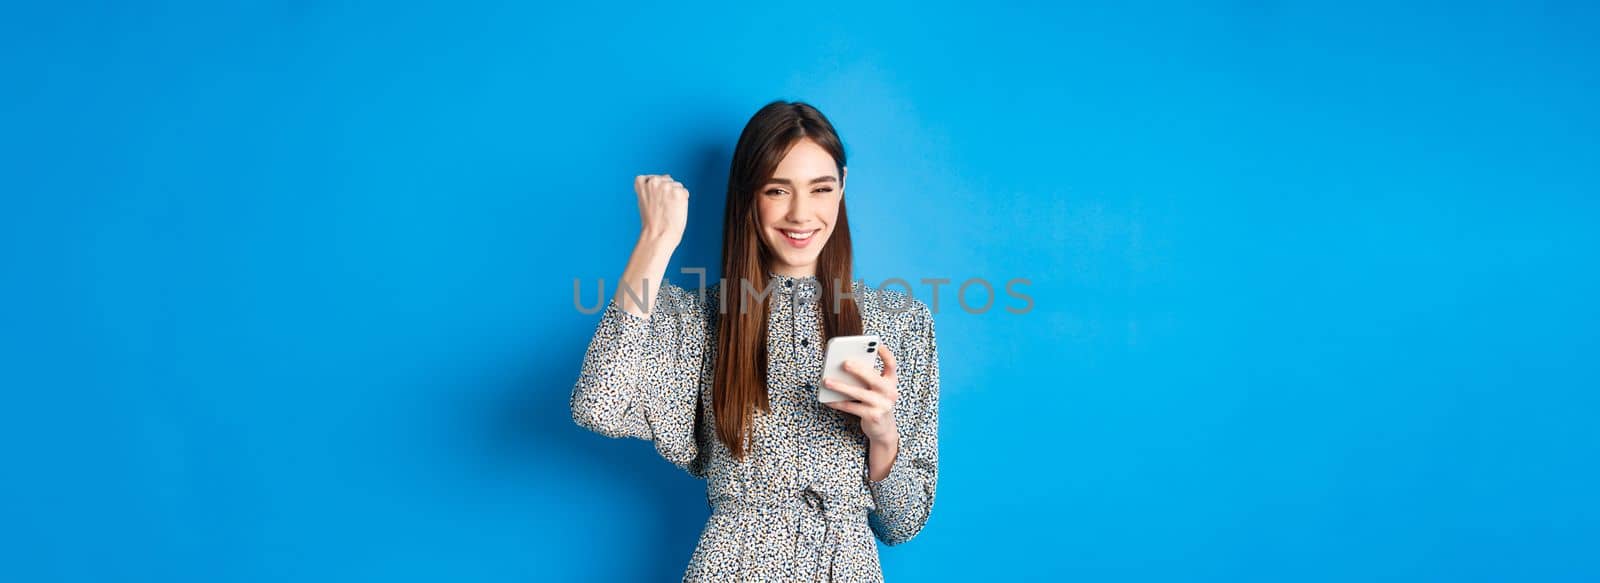 Happy pretty girl winning on mobile phone, smiling and chanting, holding smartphone, standing in dress against blue background.